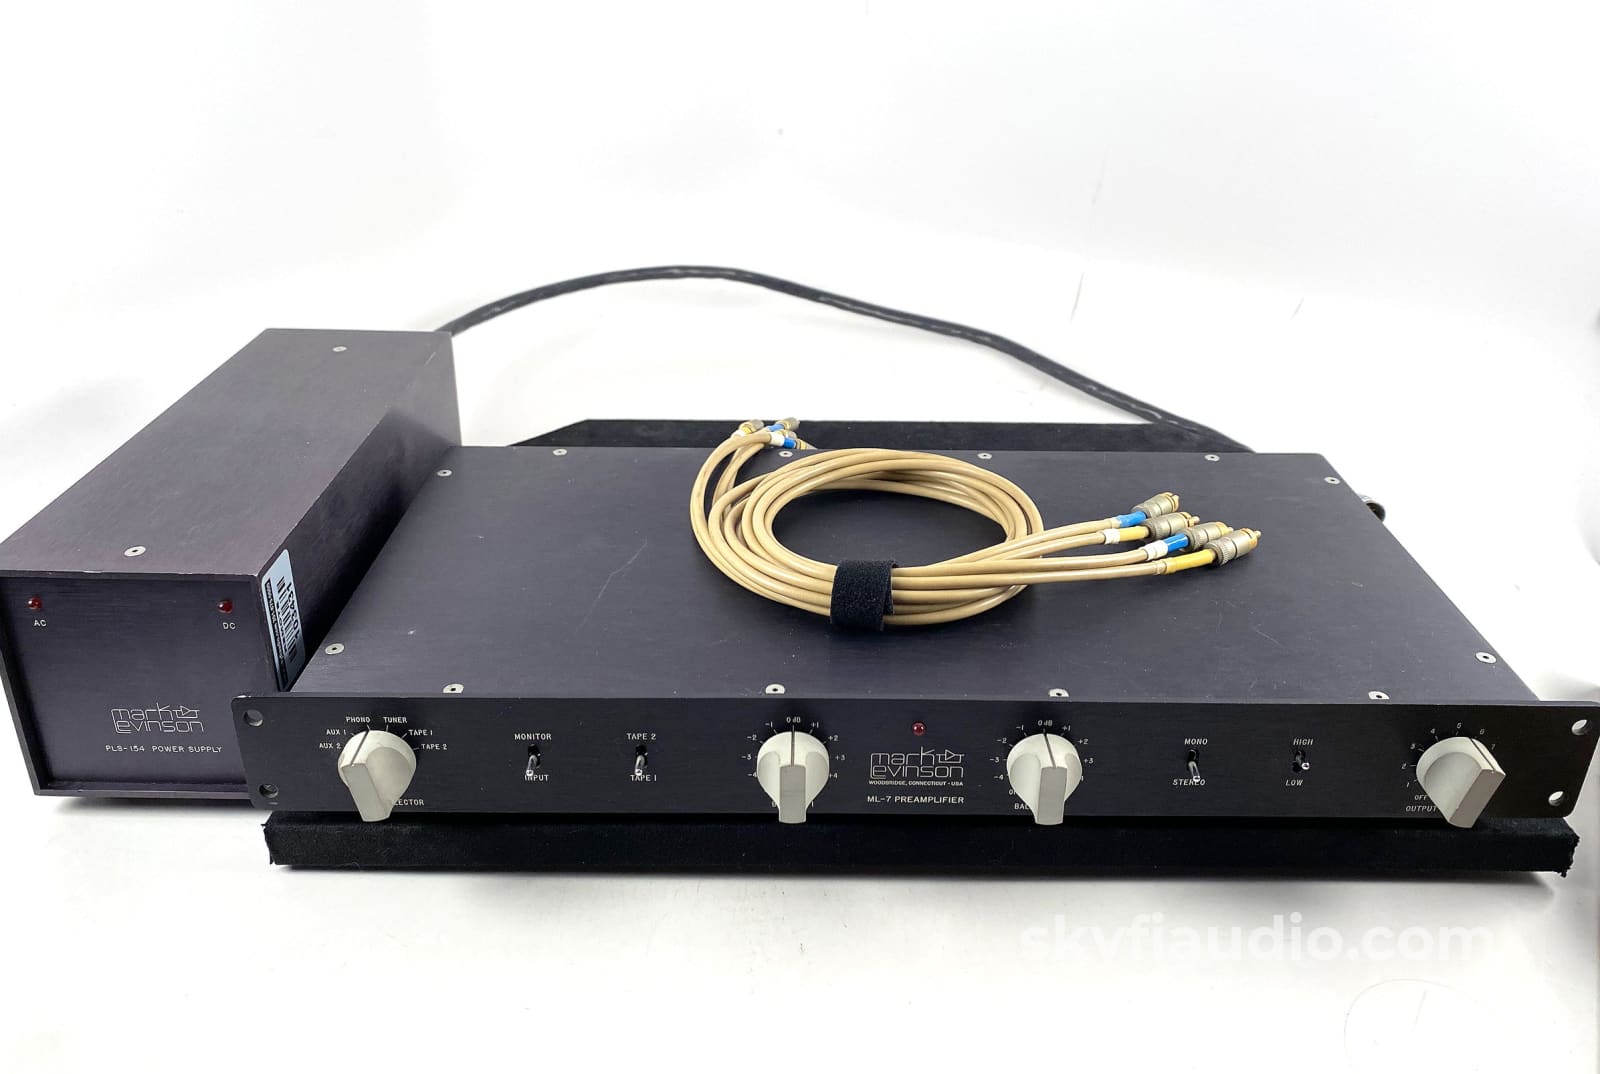 Mark Levinson Ml-7 Vintage Analog Preamp - With Phono Stage Preamplifier